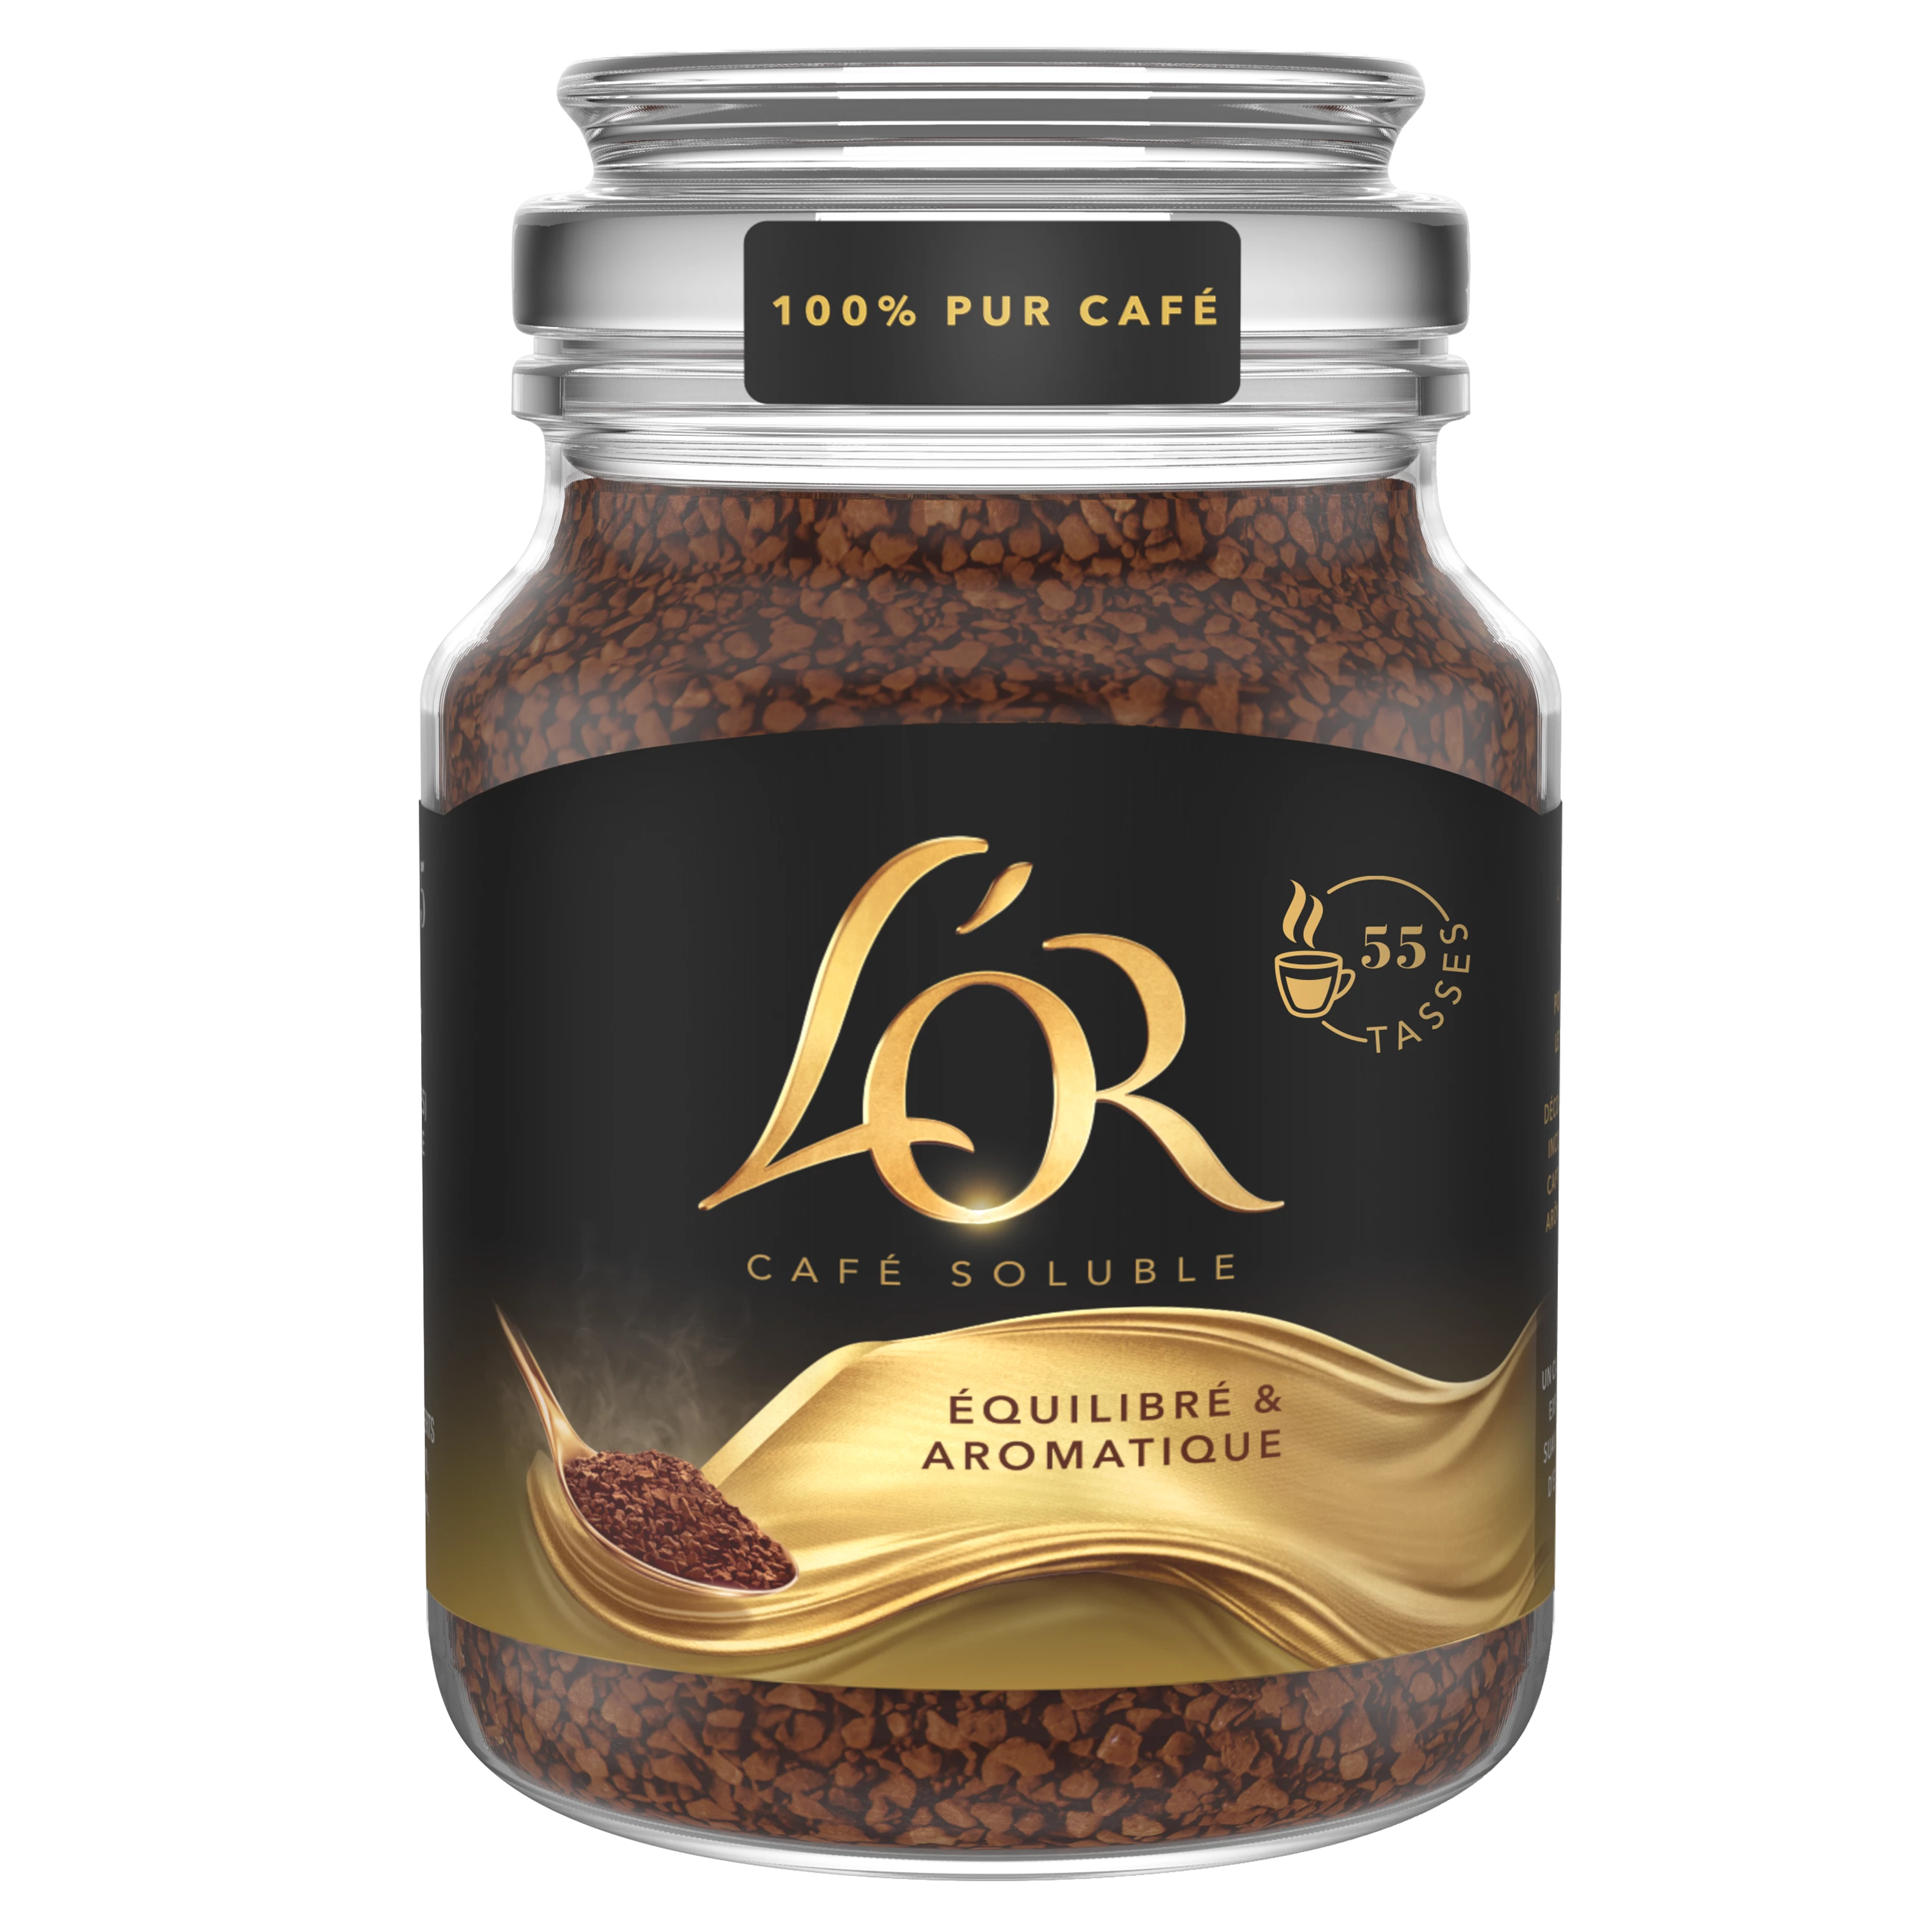 Soluble Coffee L'instant Classique Jar 100g - L'OR